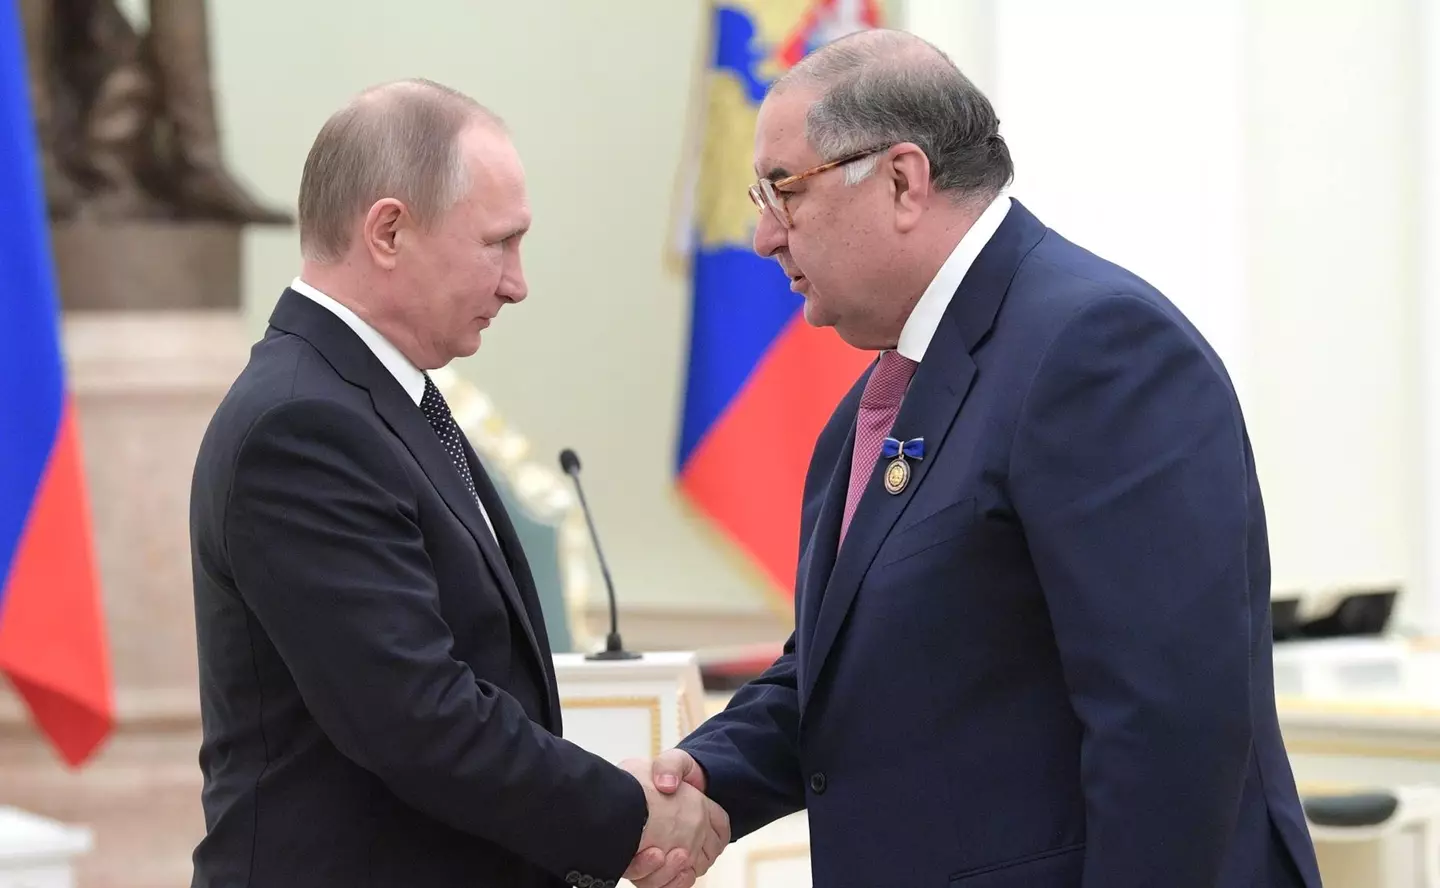 Usmanov (right) was sanctioned by the UK government.